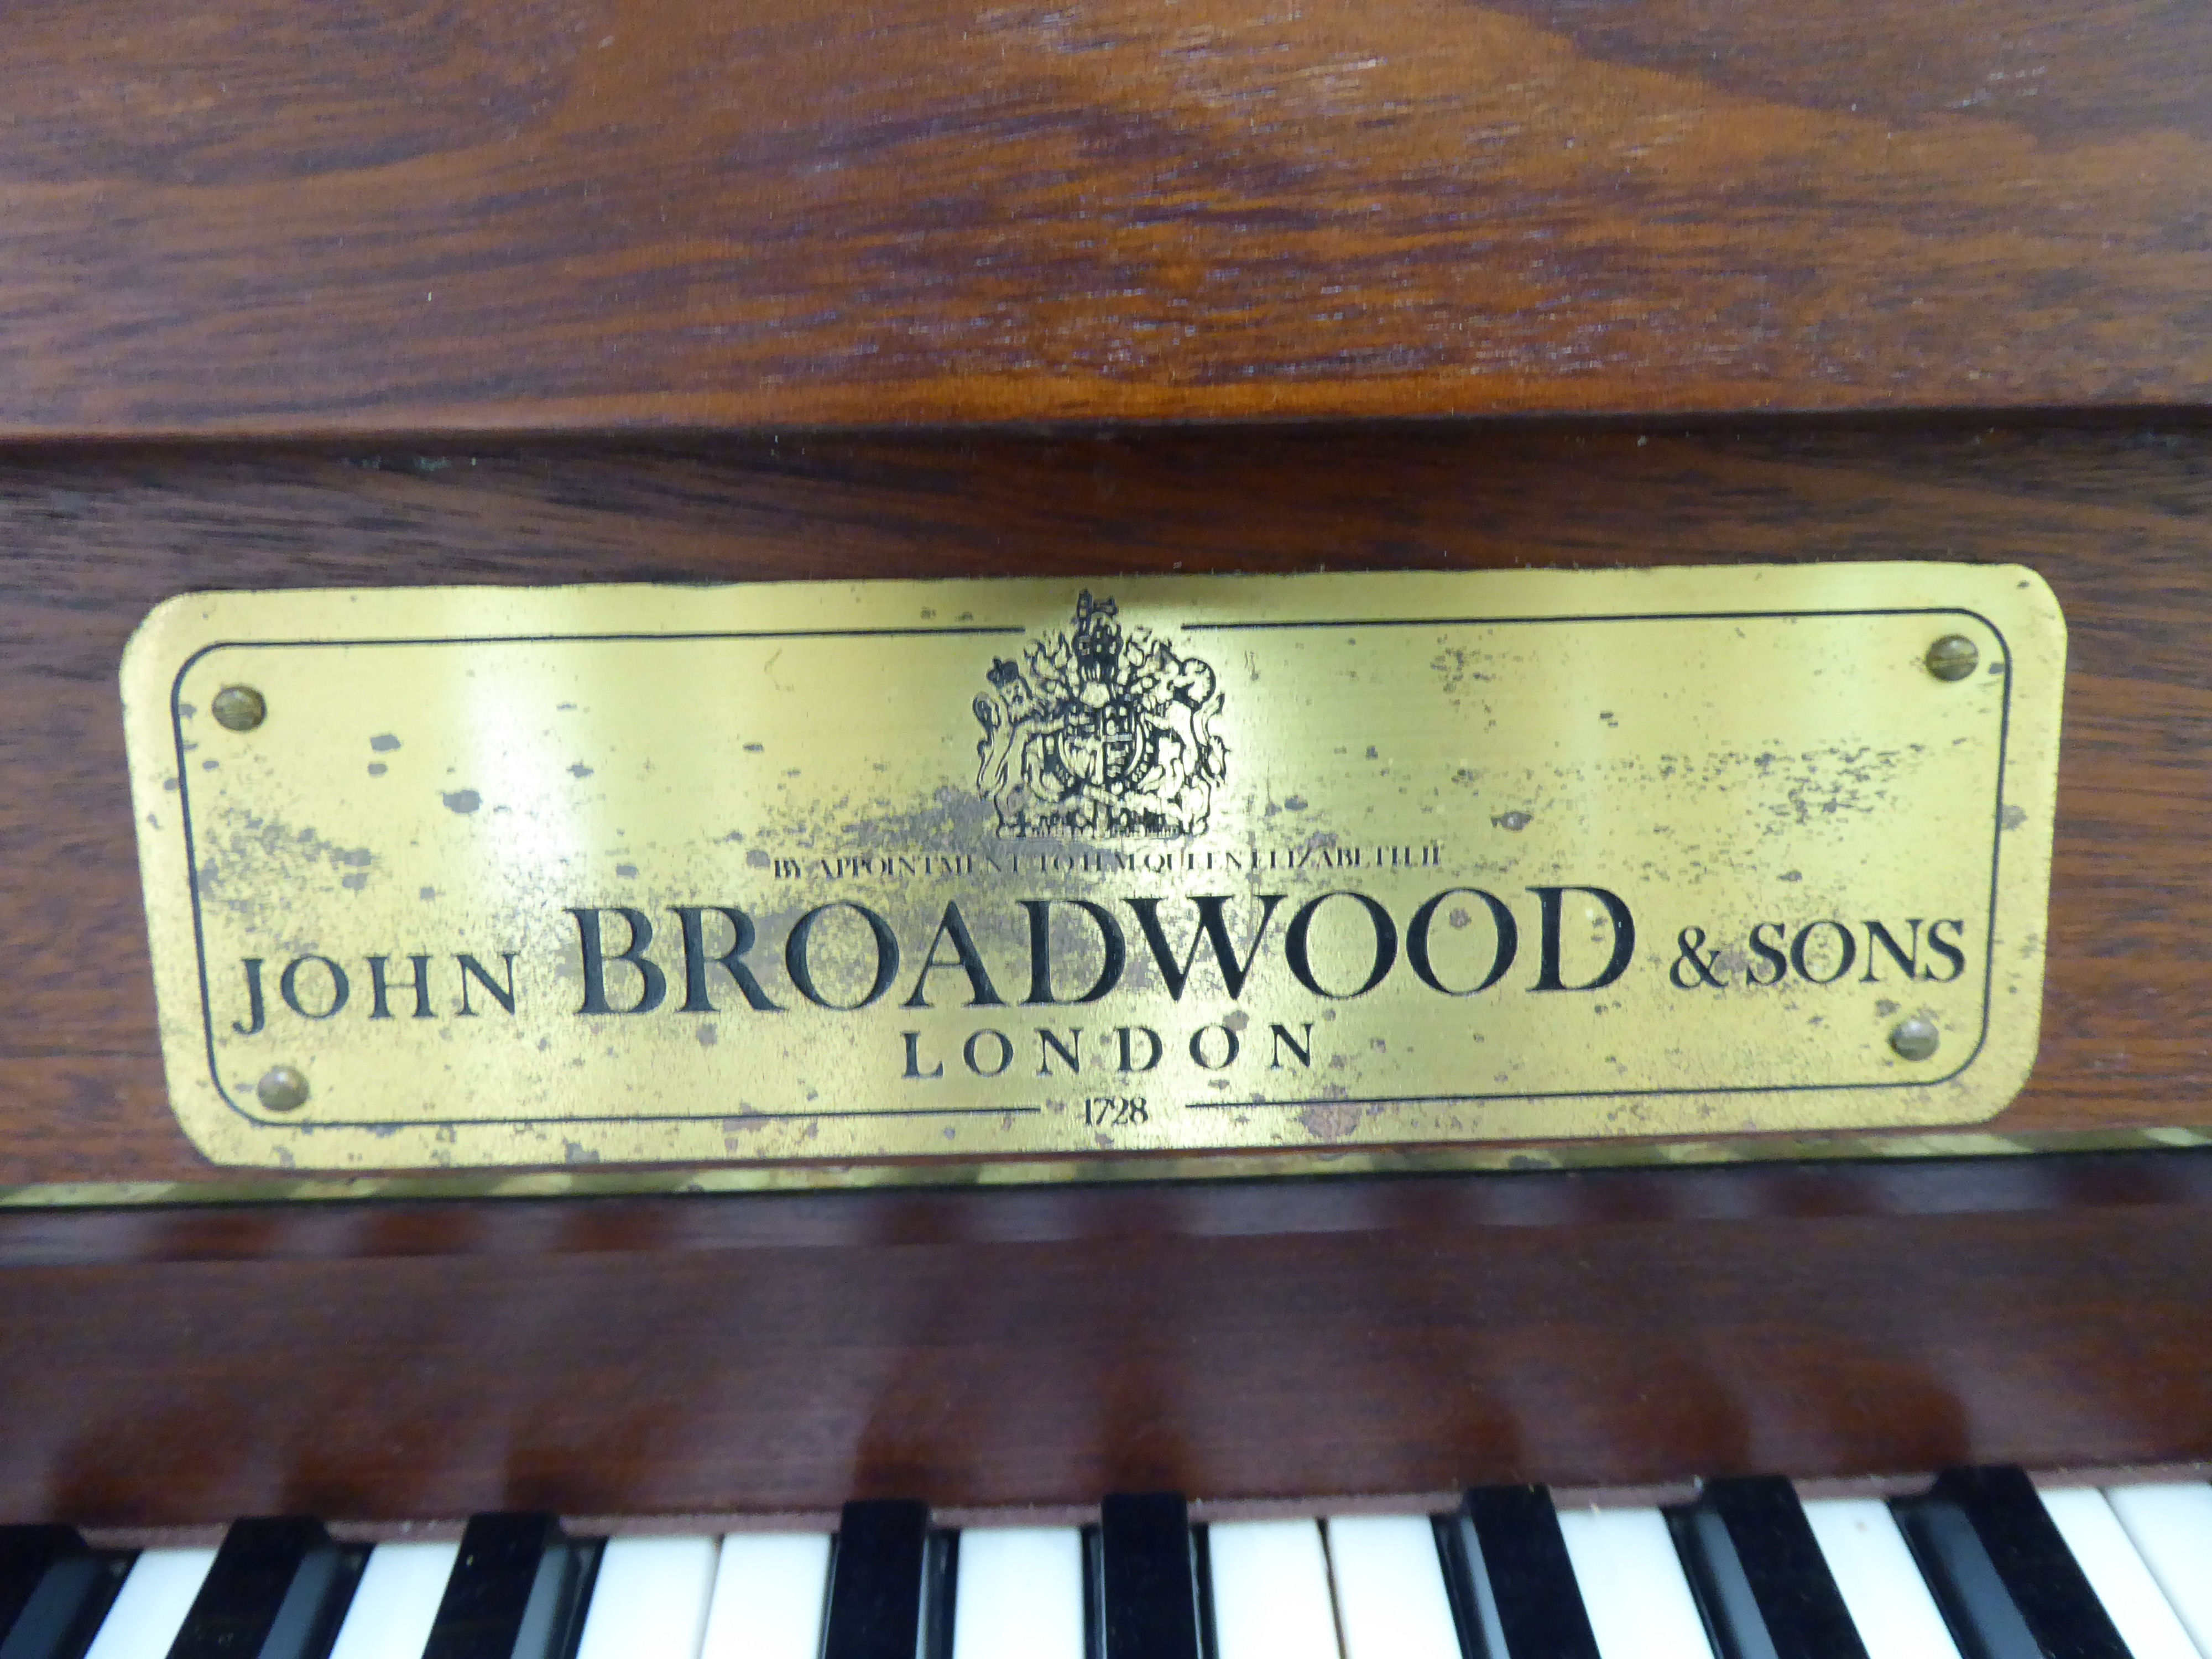 A John Broadwood & Sons teak cased upright piano with an overstrung iron frame, no. - Image 3 of 3